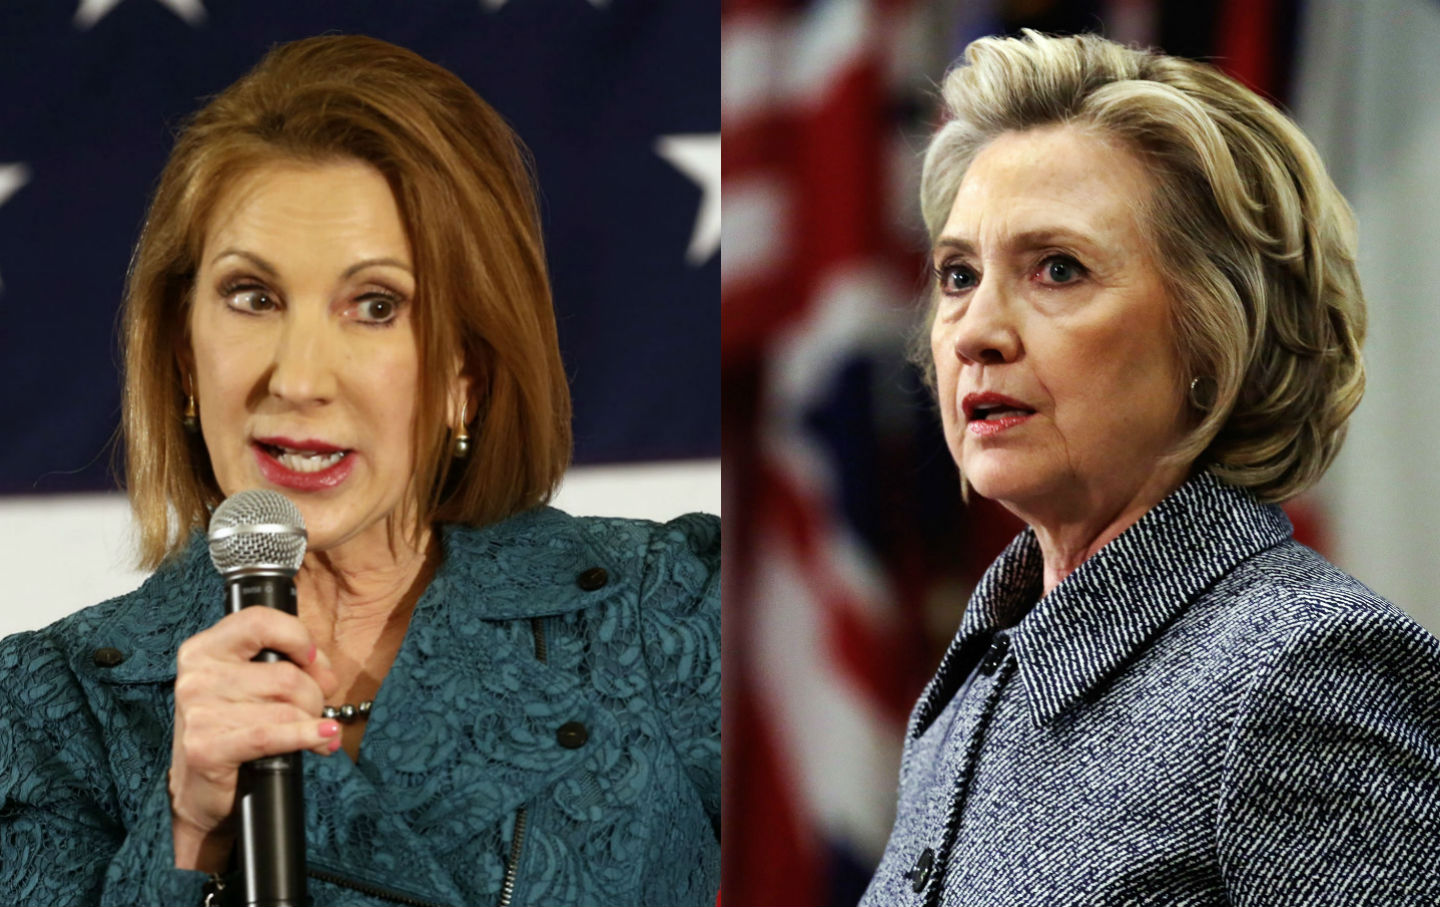 The Hillary-Carly ‘Cat Fight’ That Men, the Media, and Fiorina Want